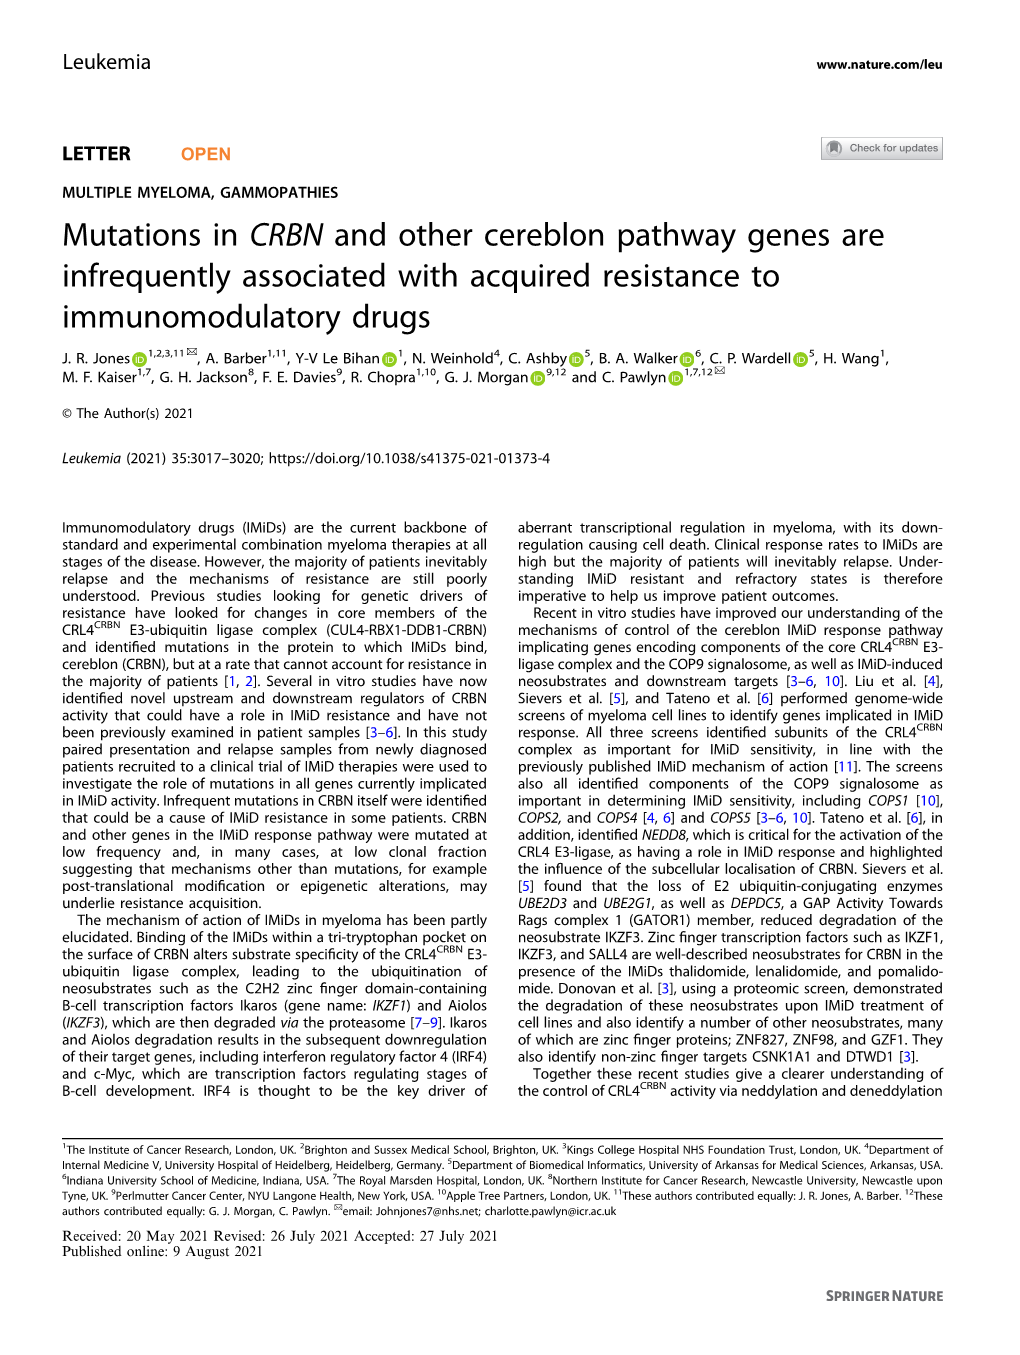 Mutations in CRBN and Other Cereblon Pathway Genes Are Infrequently Associated with Acquired Resistance to Immunomodulatory Drugs